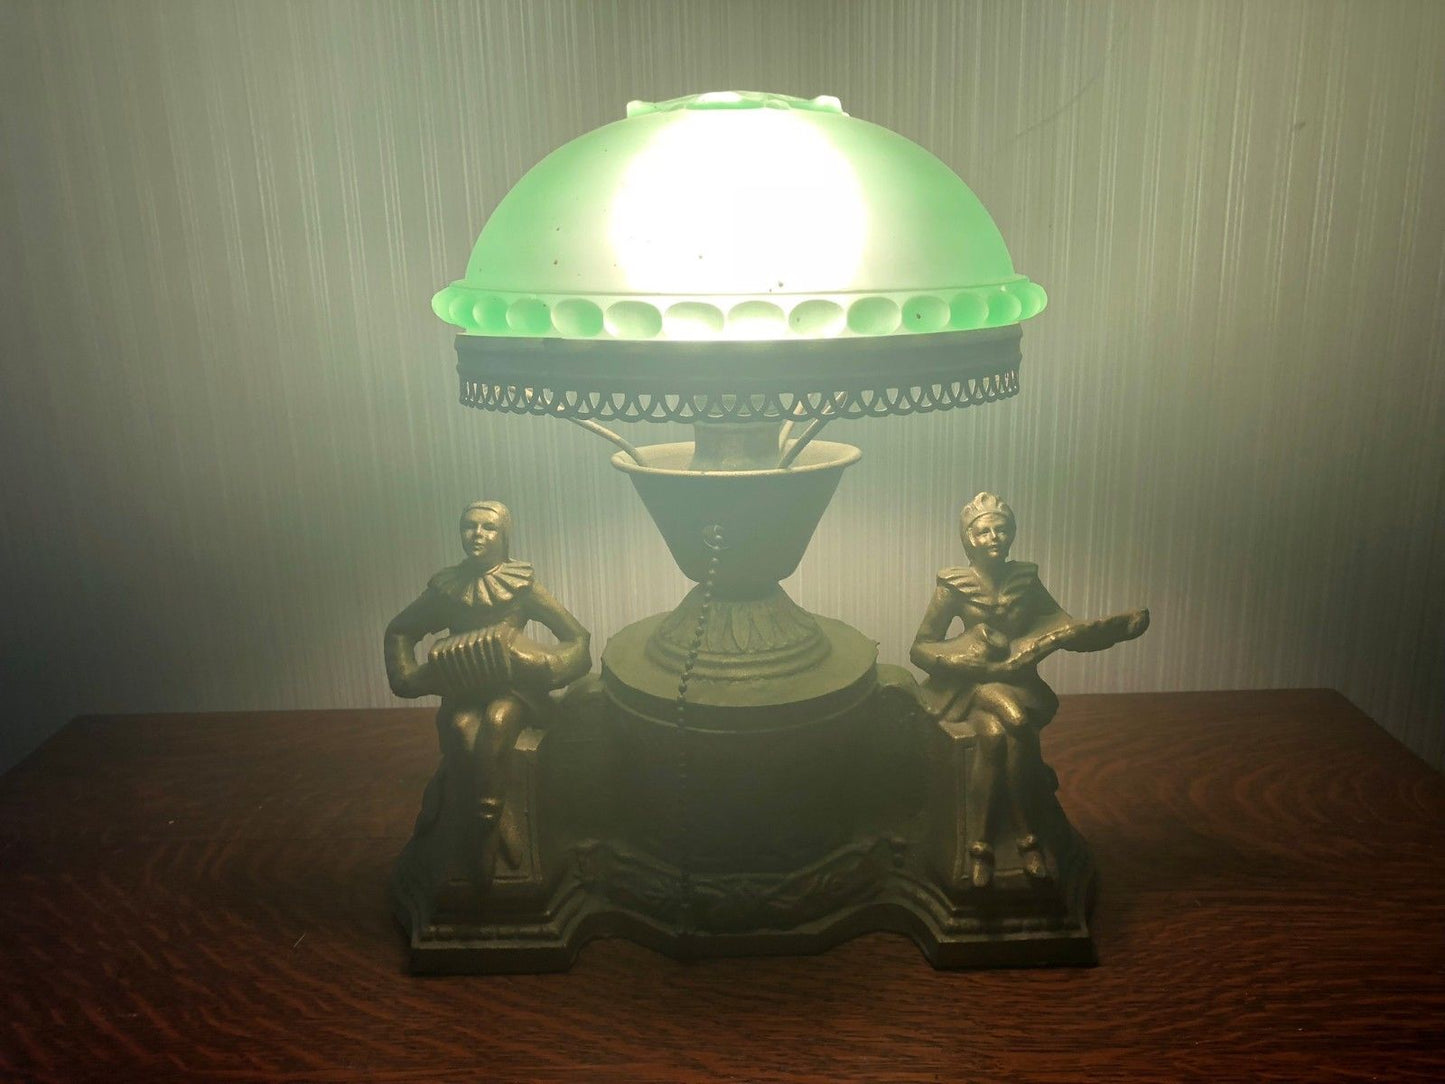 FRANK ART TABLE LAMP WITH GREEN GLASS DOMED SHADE